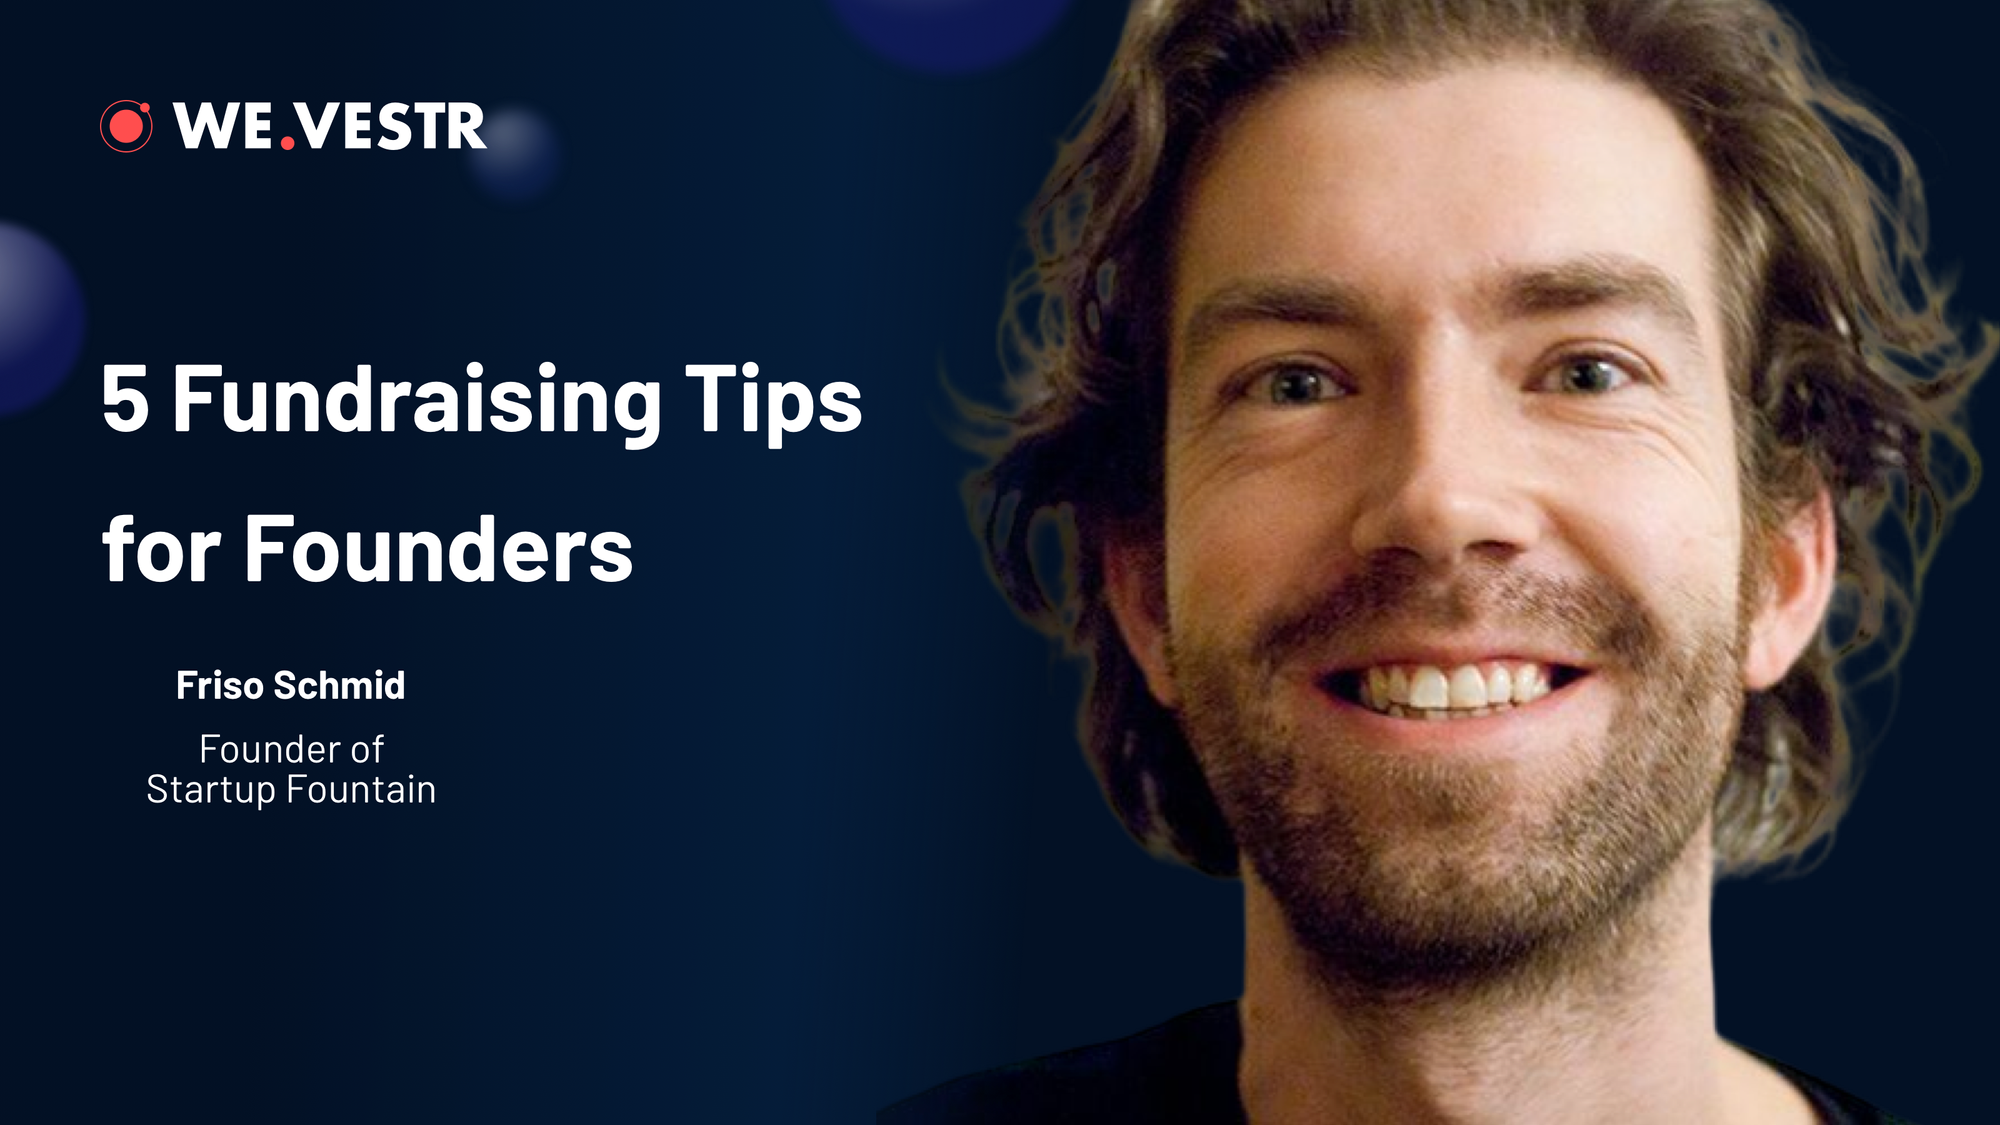 5 Fundraising Tips for Founders from Friso Schmid